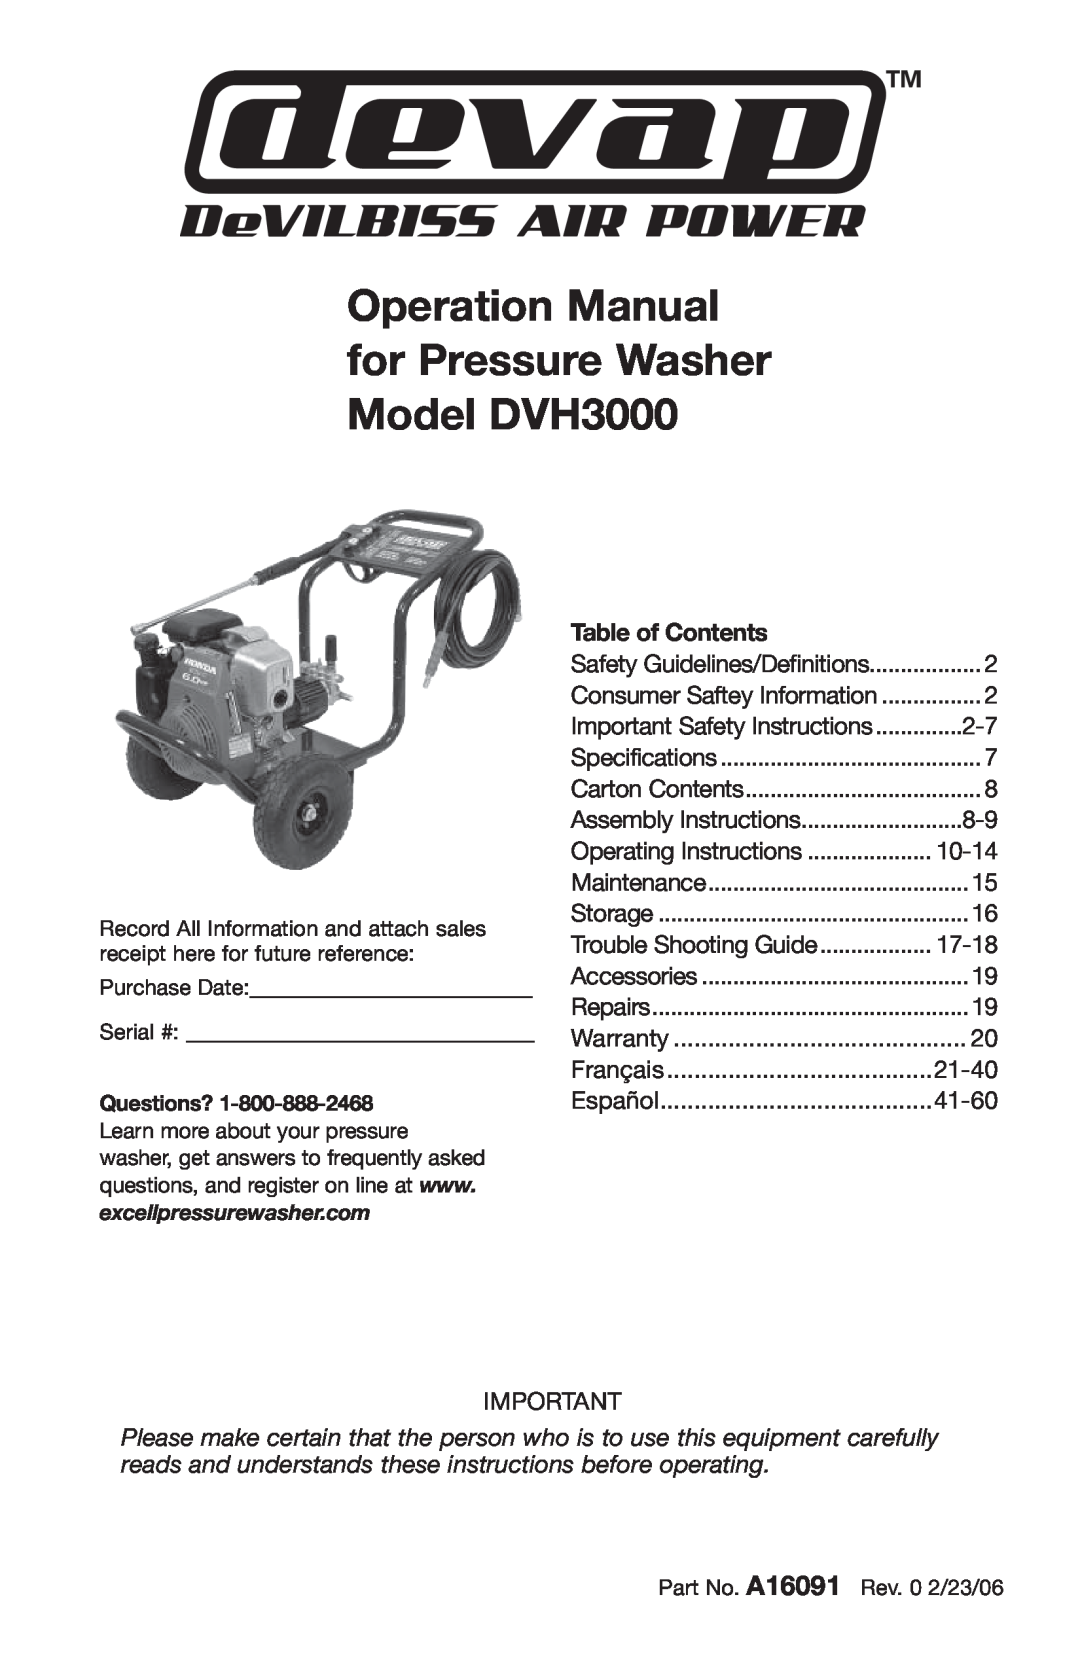 DeVillbiss Air Power Company operation manual Operation Manual for Pressure Washer Model DVH3000, Table of Contents 